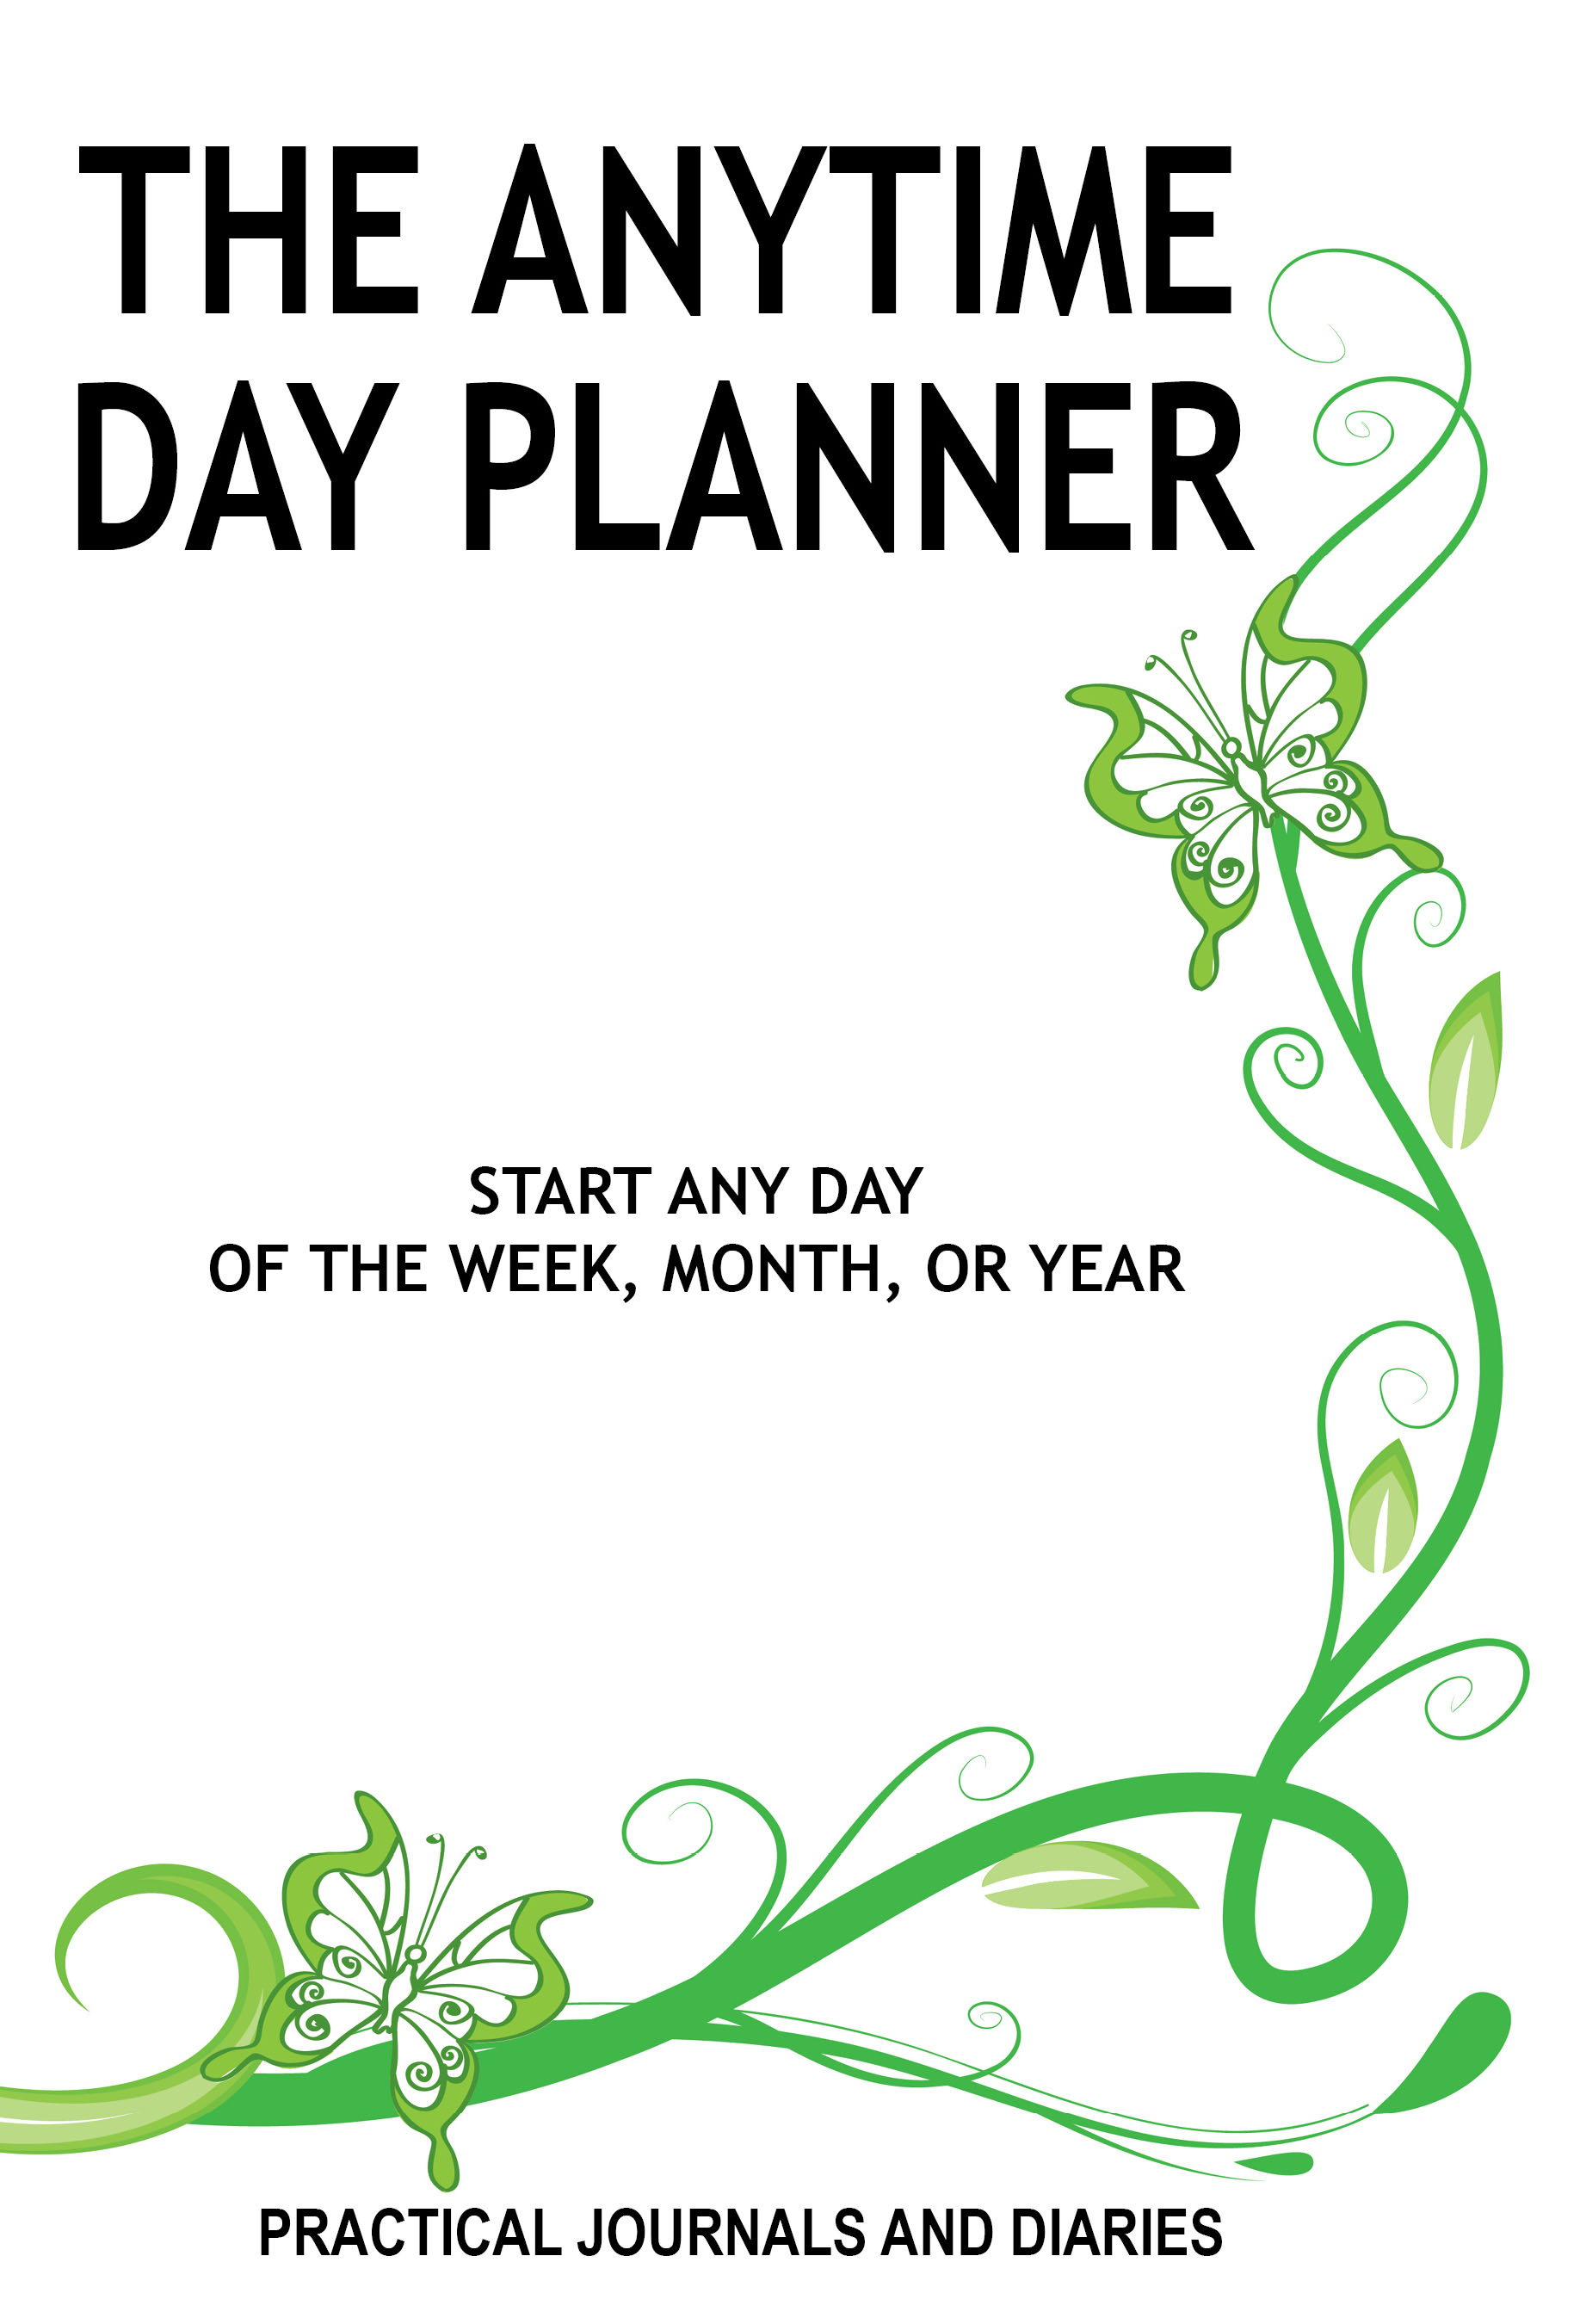 Anytime Day Planner cover